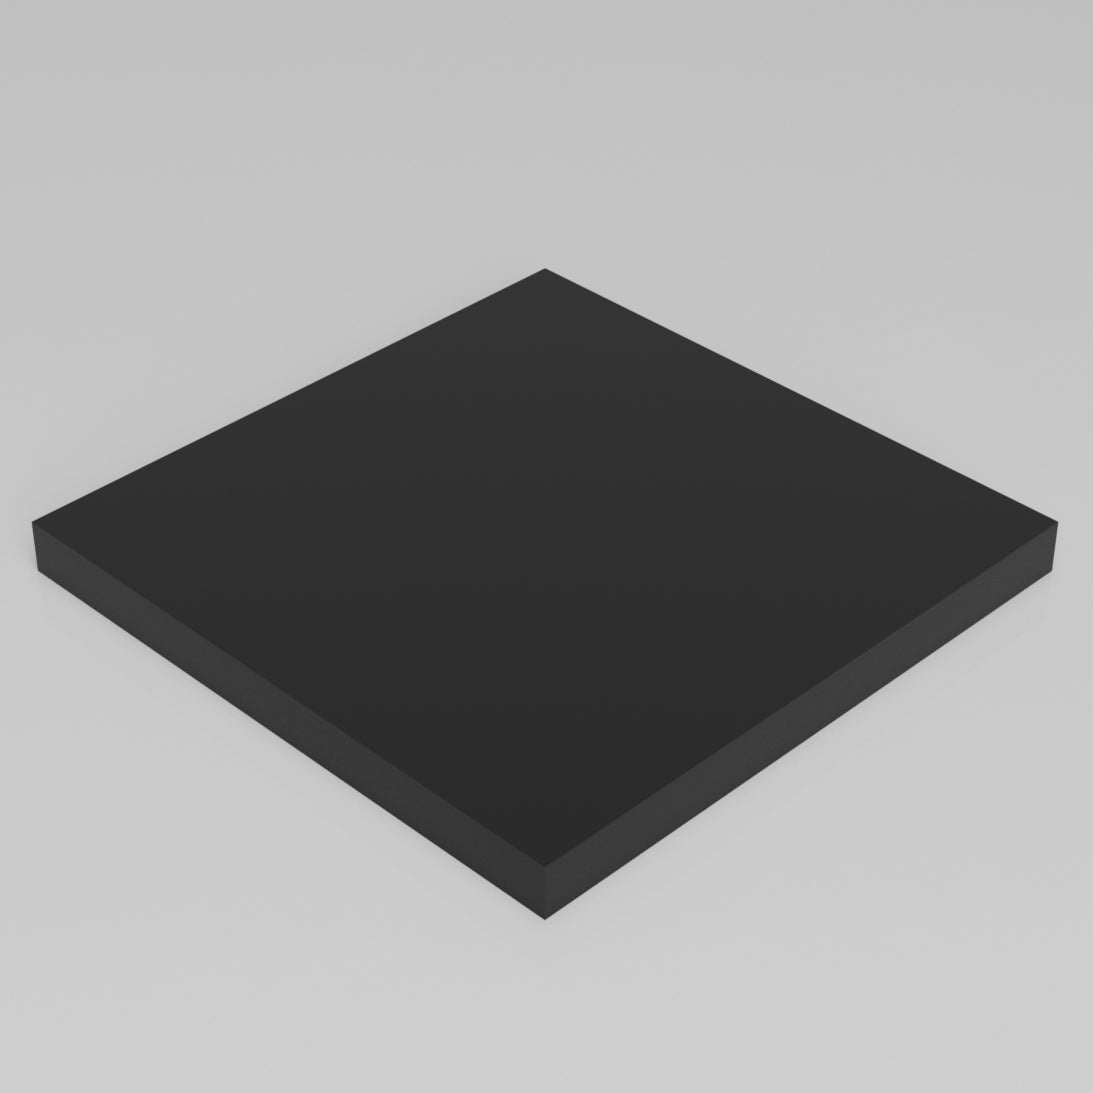 Machinable Wax Rectangular Block Front View 1 Inch by 12 Inch by 12 Inch